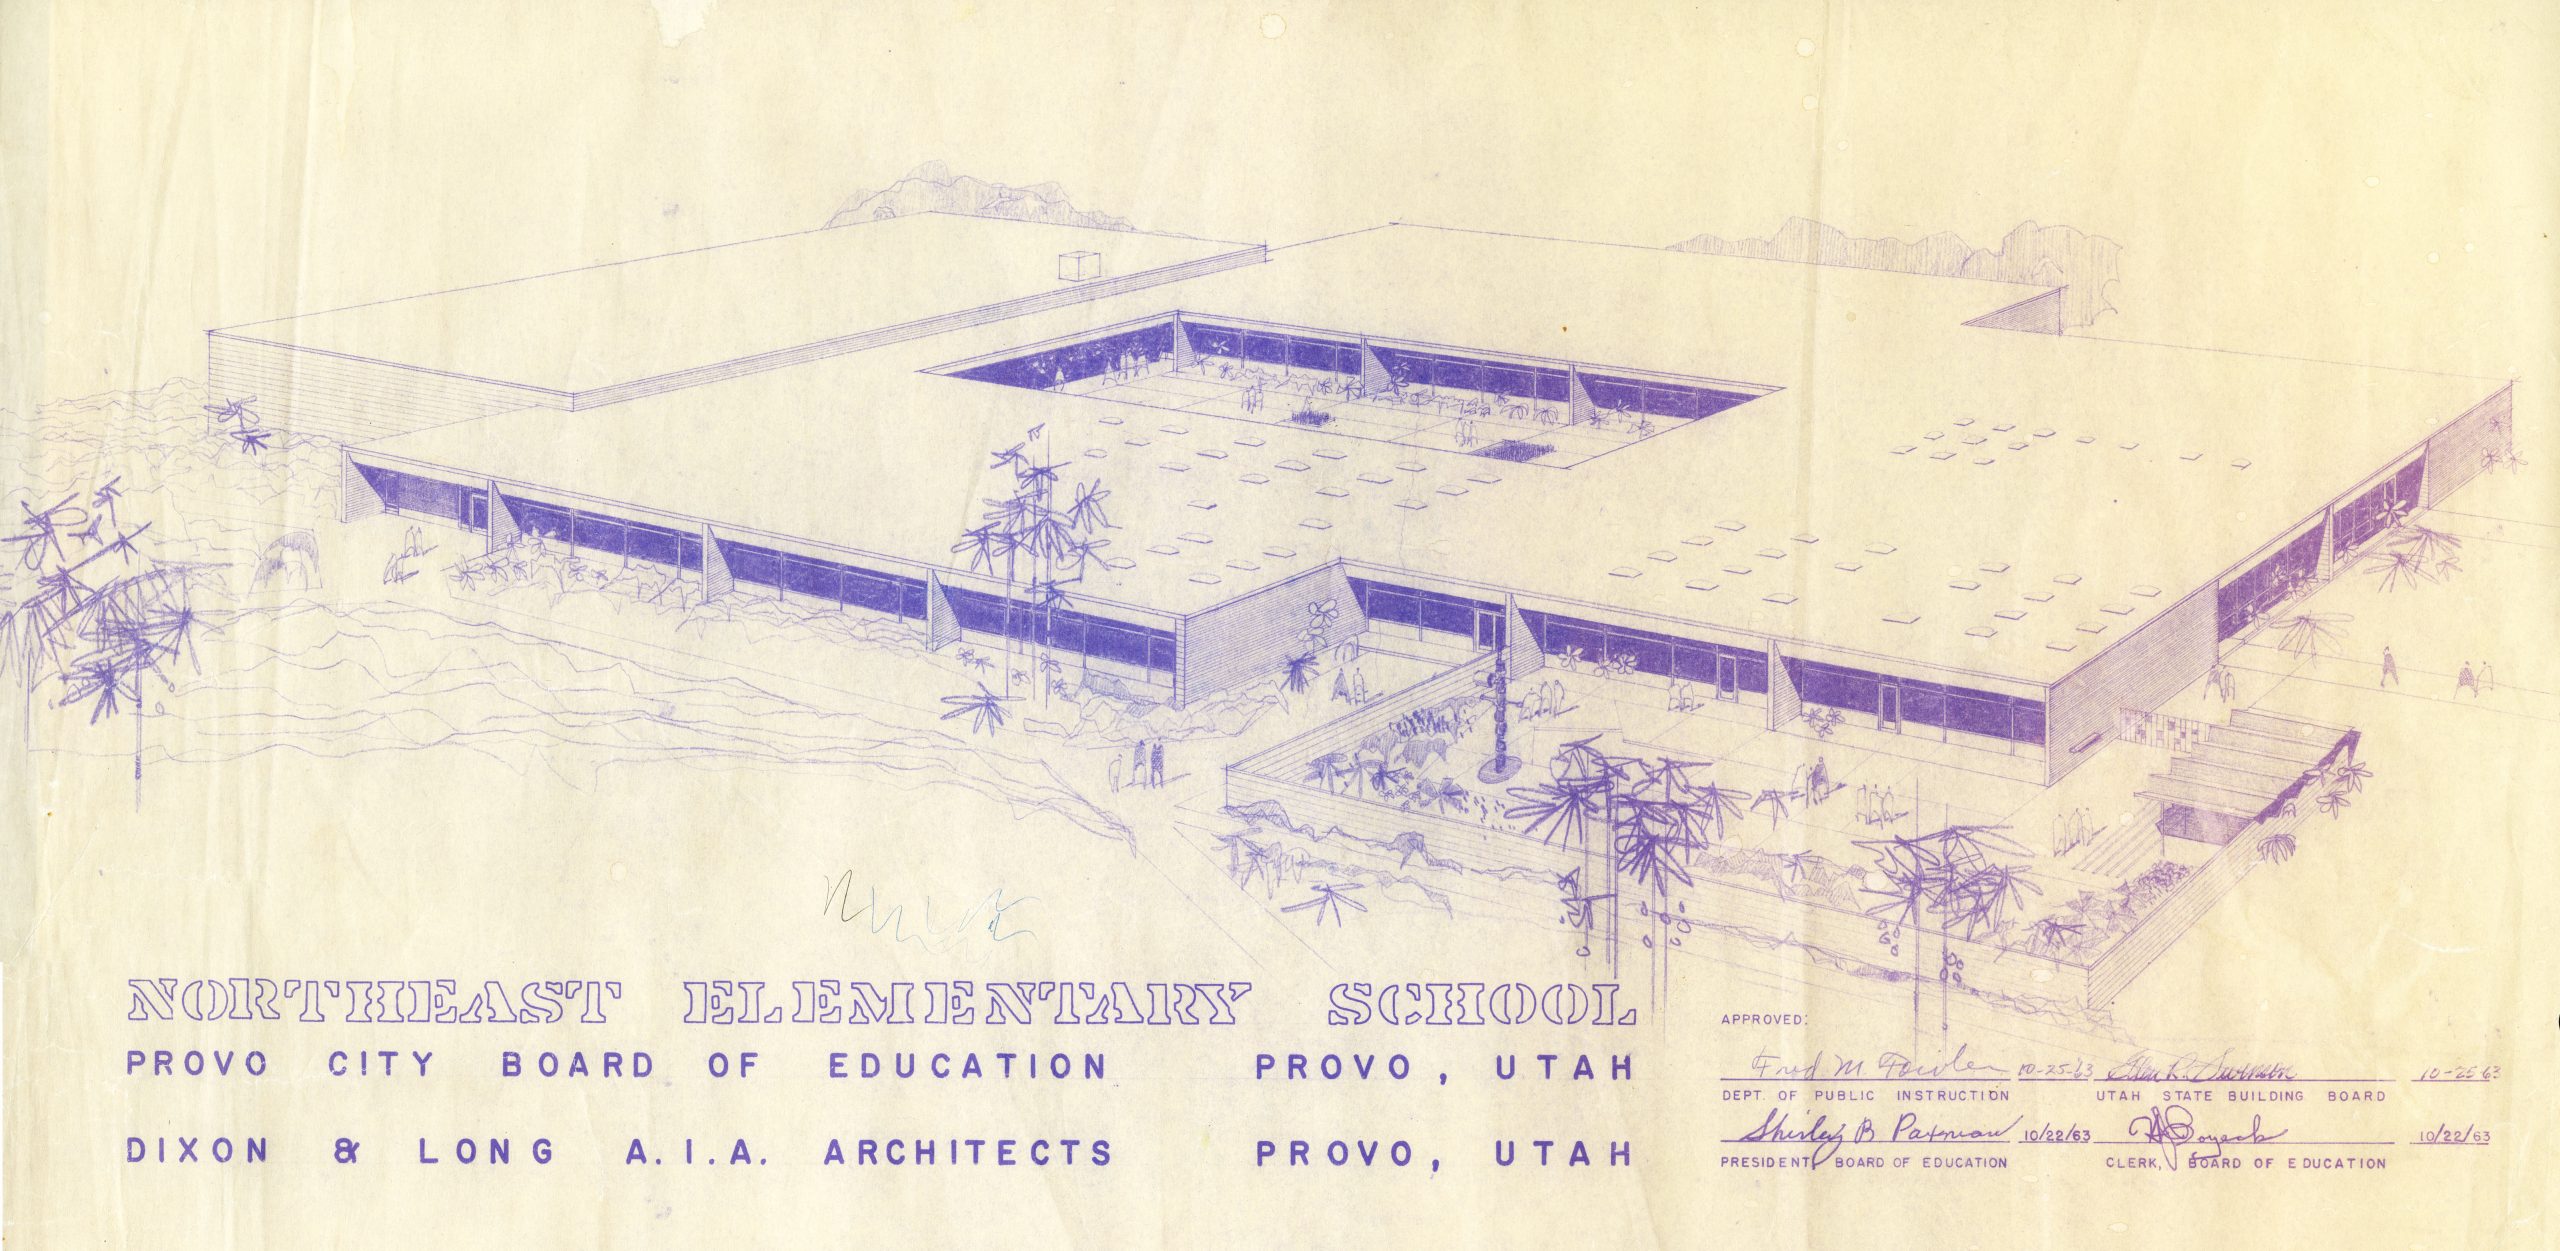 Building plan for Northeast Elementary school in Provo, UT dated October 23, 1963.